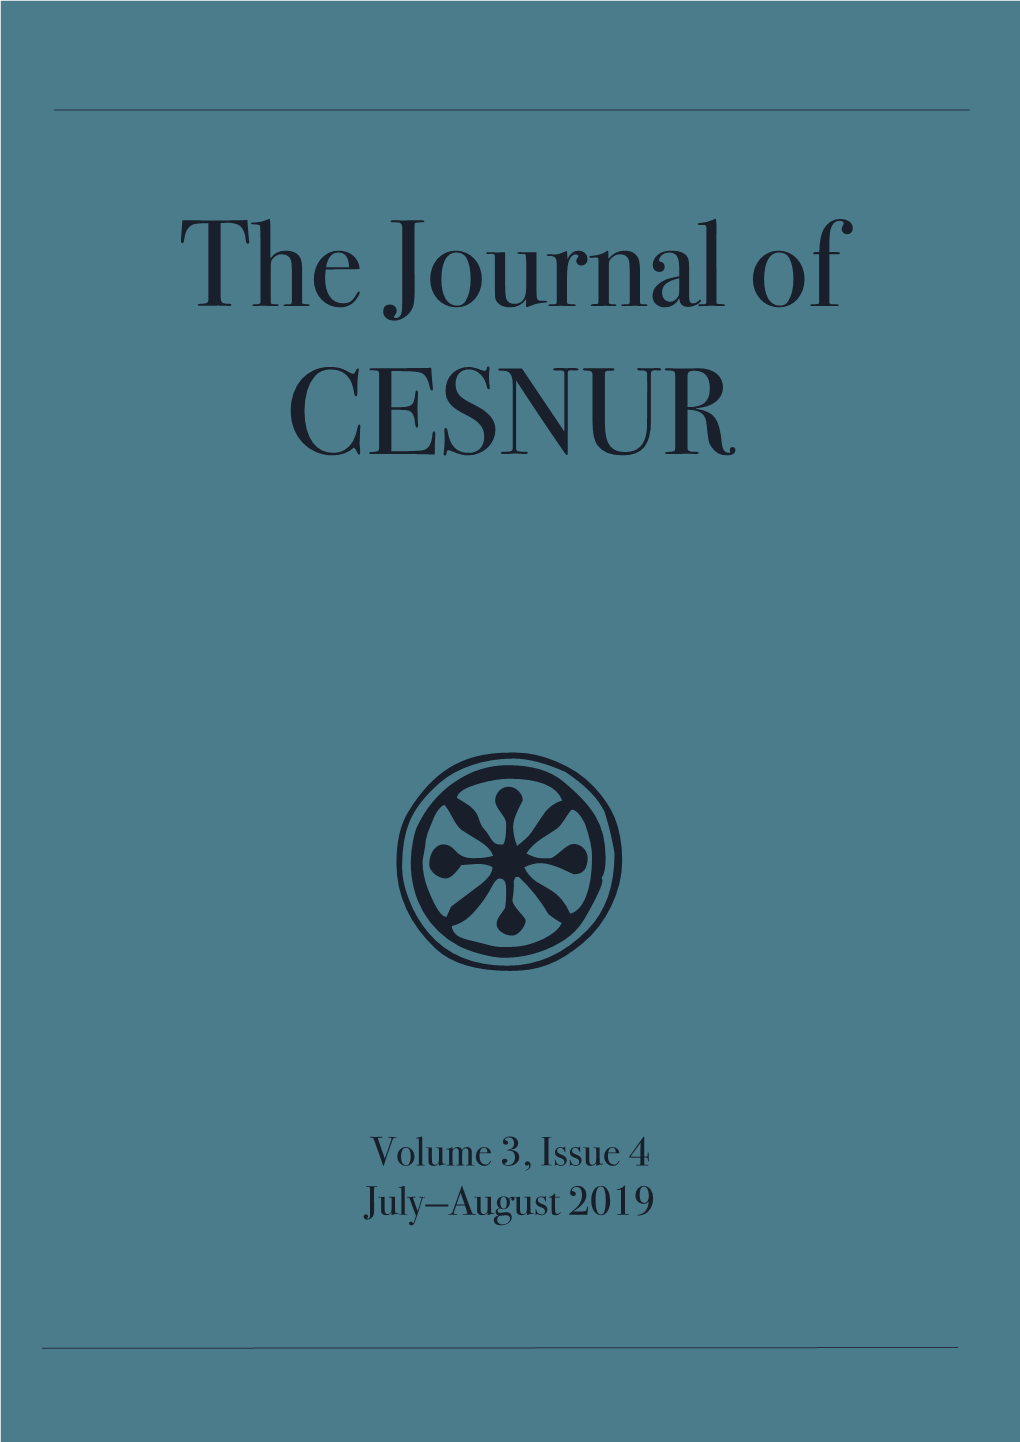 Volume 3, Issue 4 July—August 2019